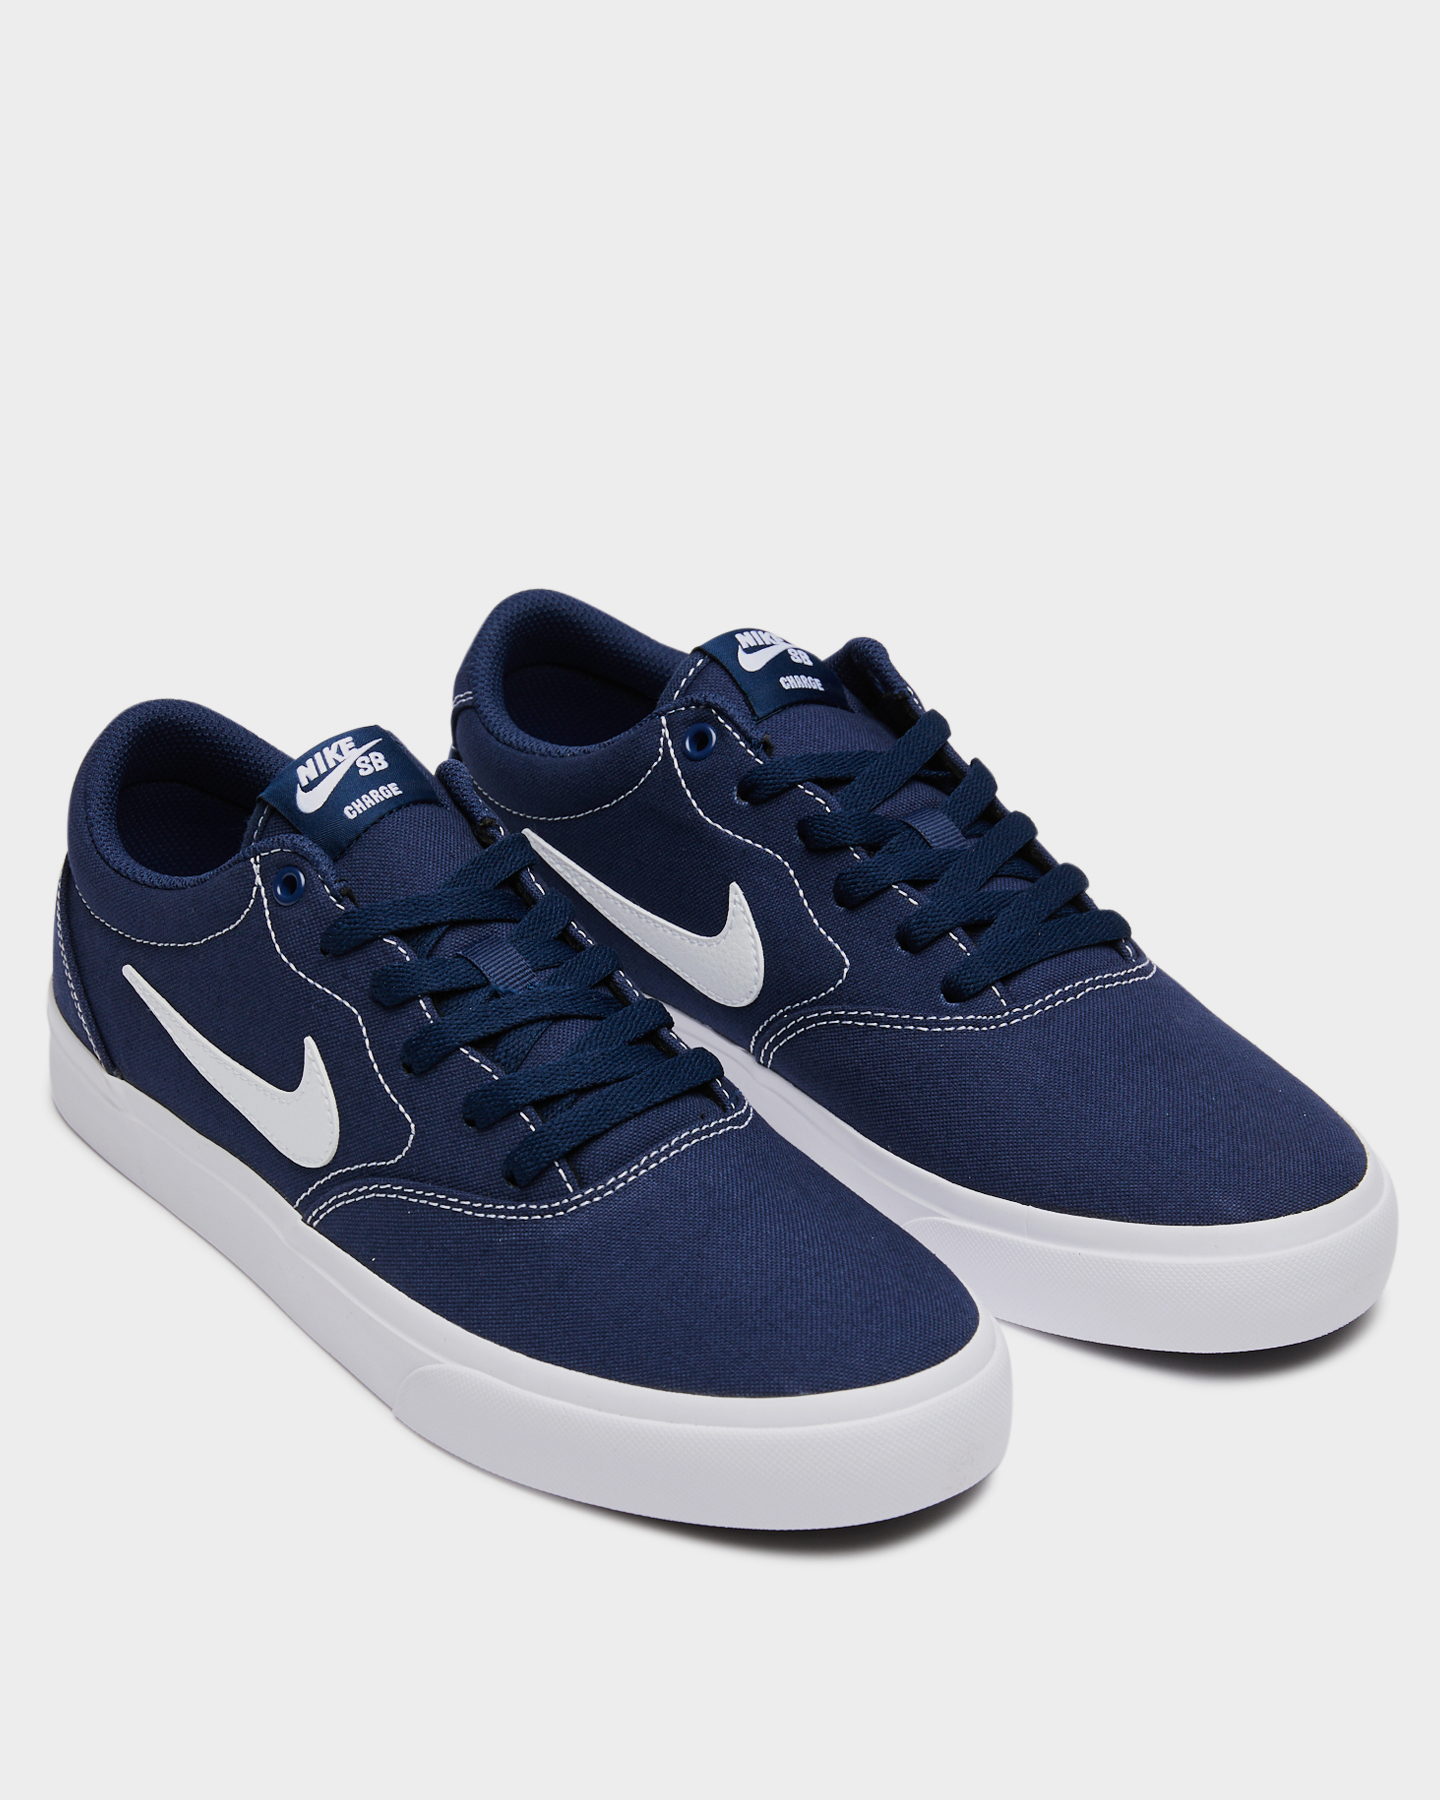 Nike Sb Charge Solarsoft Textile Shoe - Midnight Navy | SurfStitch